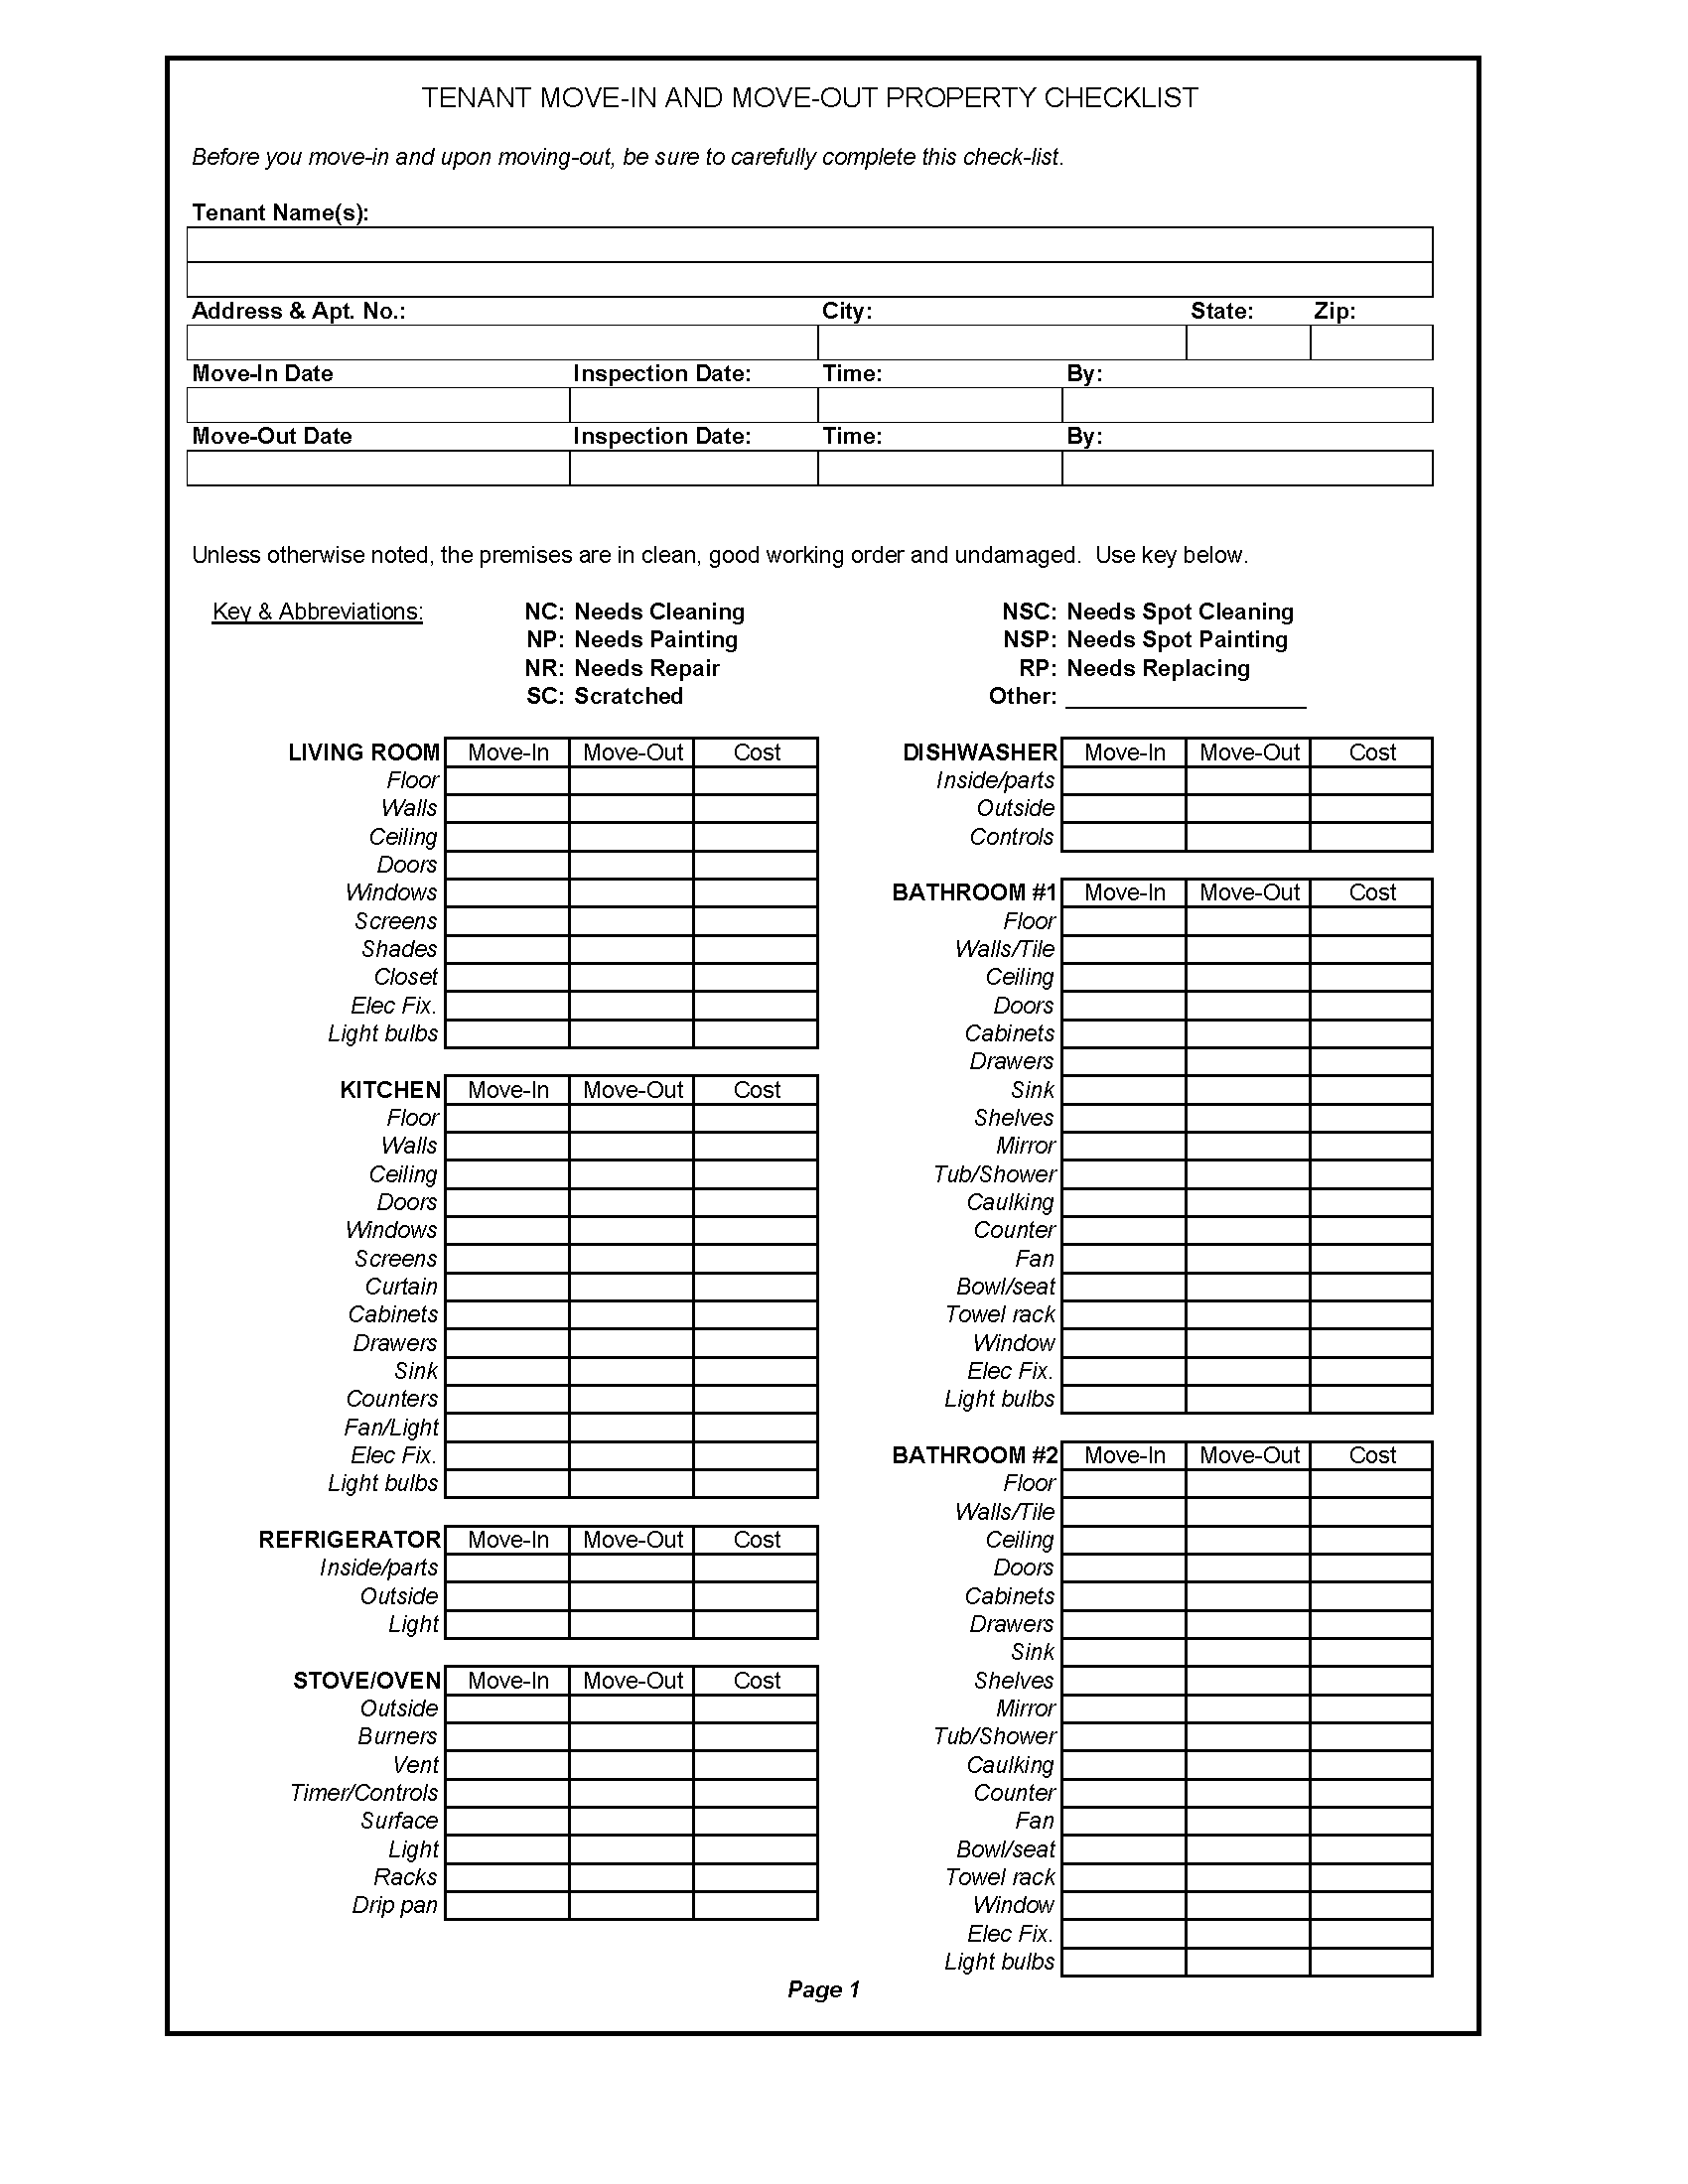 Free Arizona Move in/Move out Checklist  PDF Throughout Tenant Move In Checklist Template With Tenant Move In Checklist Template